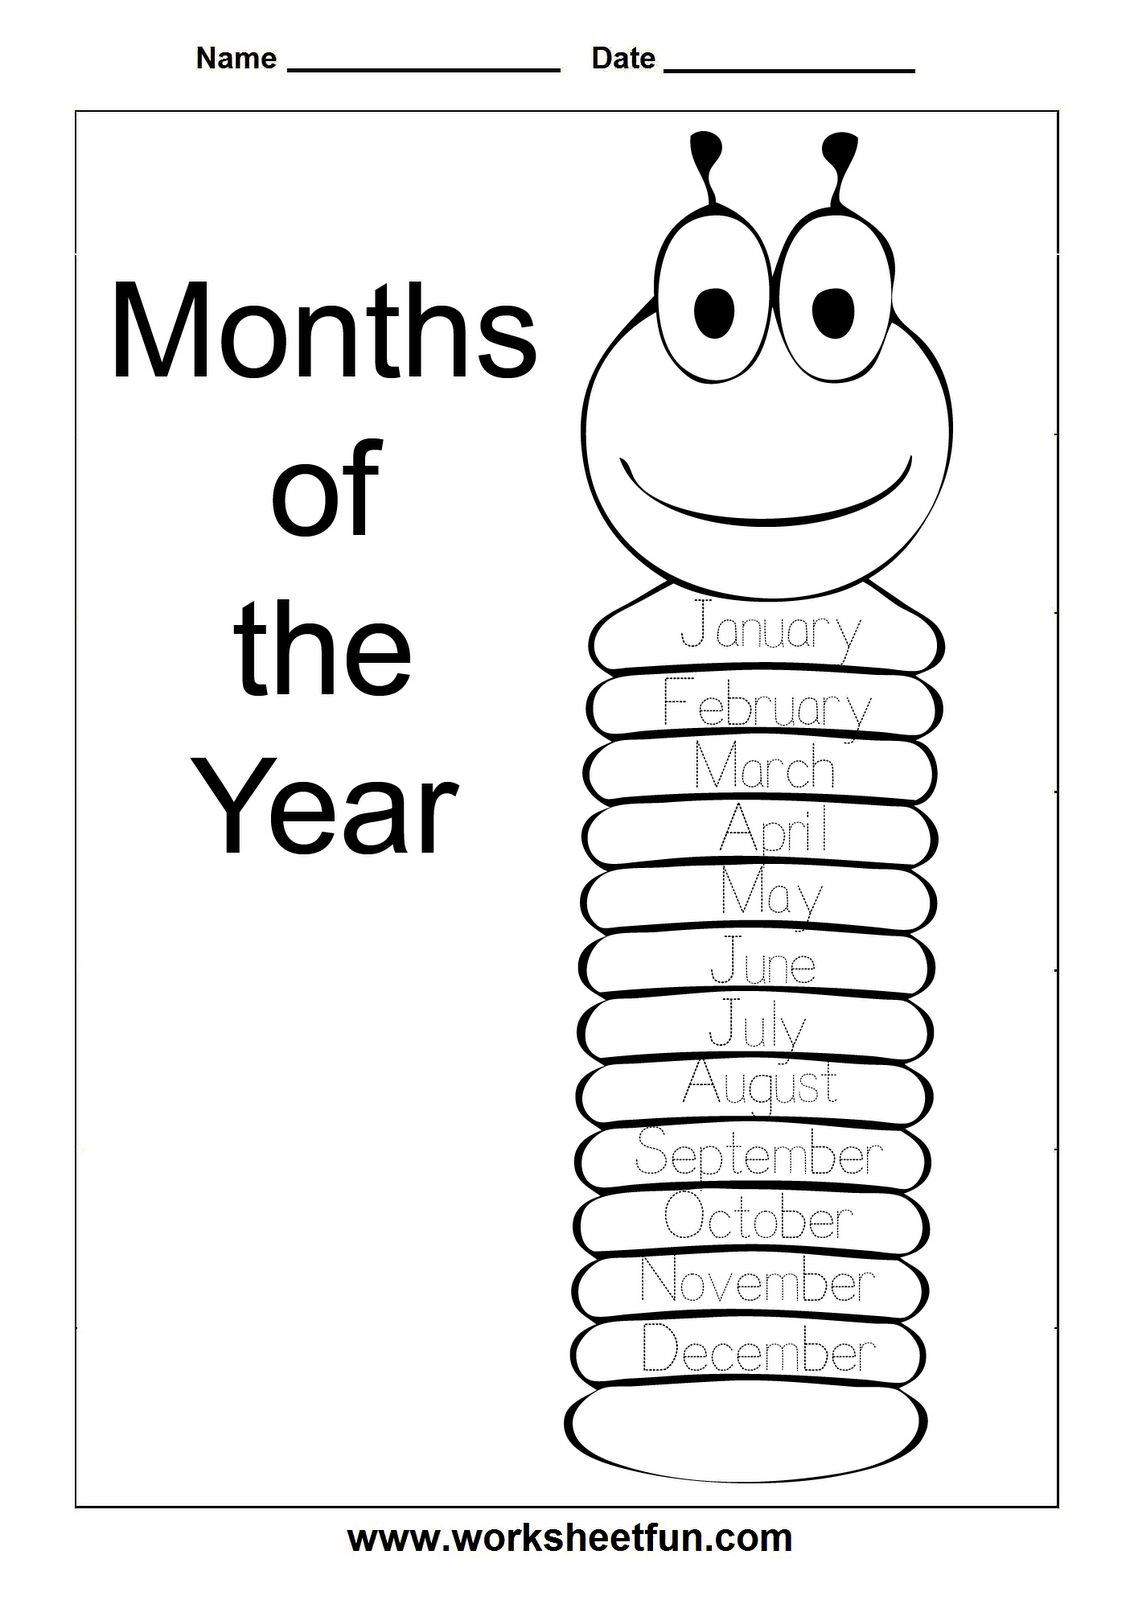 Image Result For How To Teach Months Of The Year | Kiddo | Months In - Free Printable Months Of The Year Chart